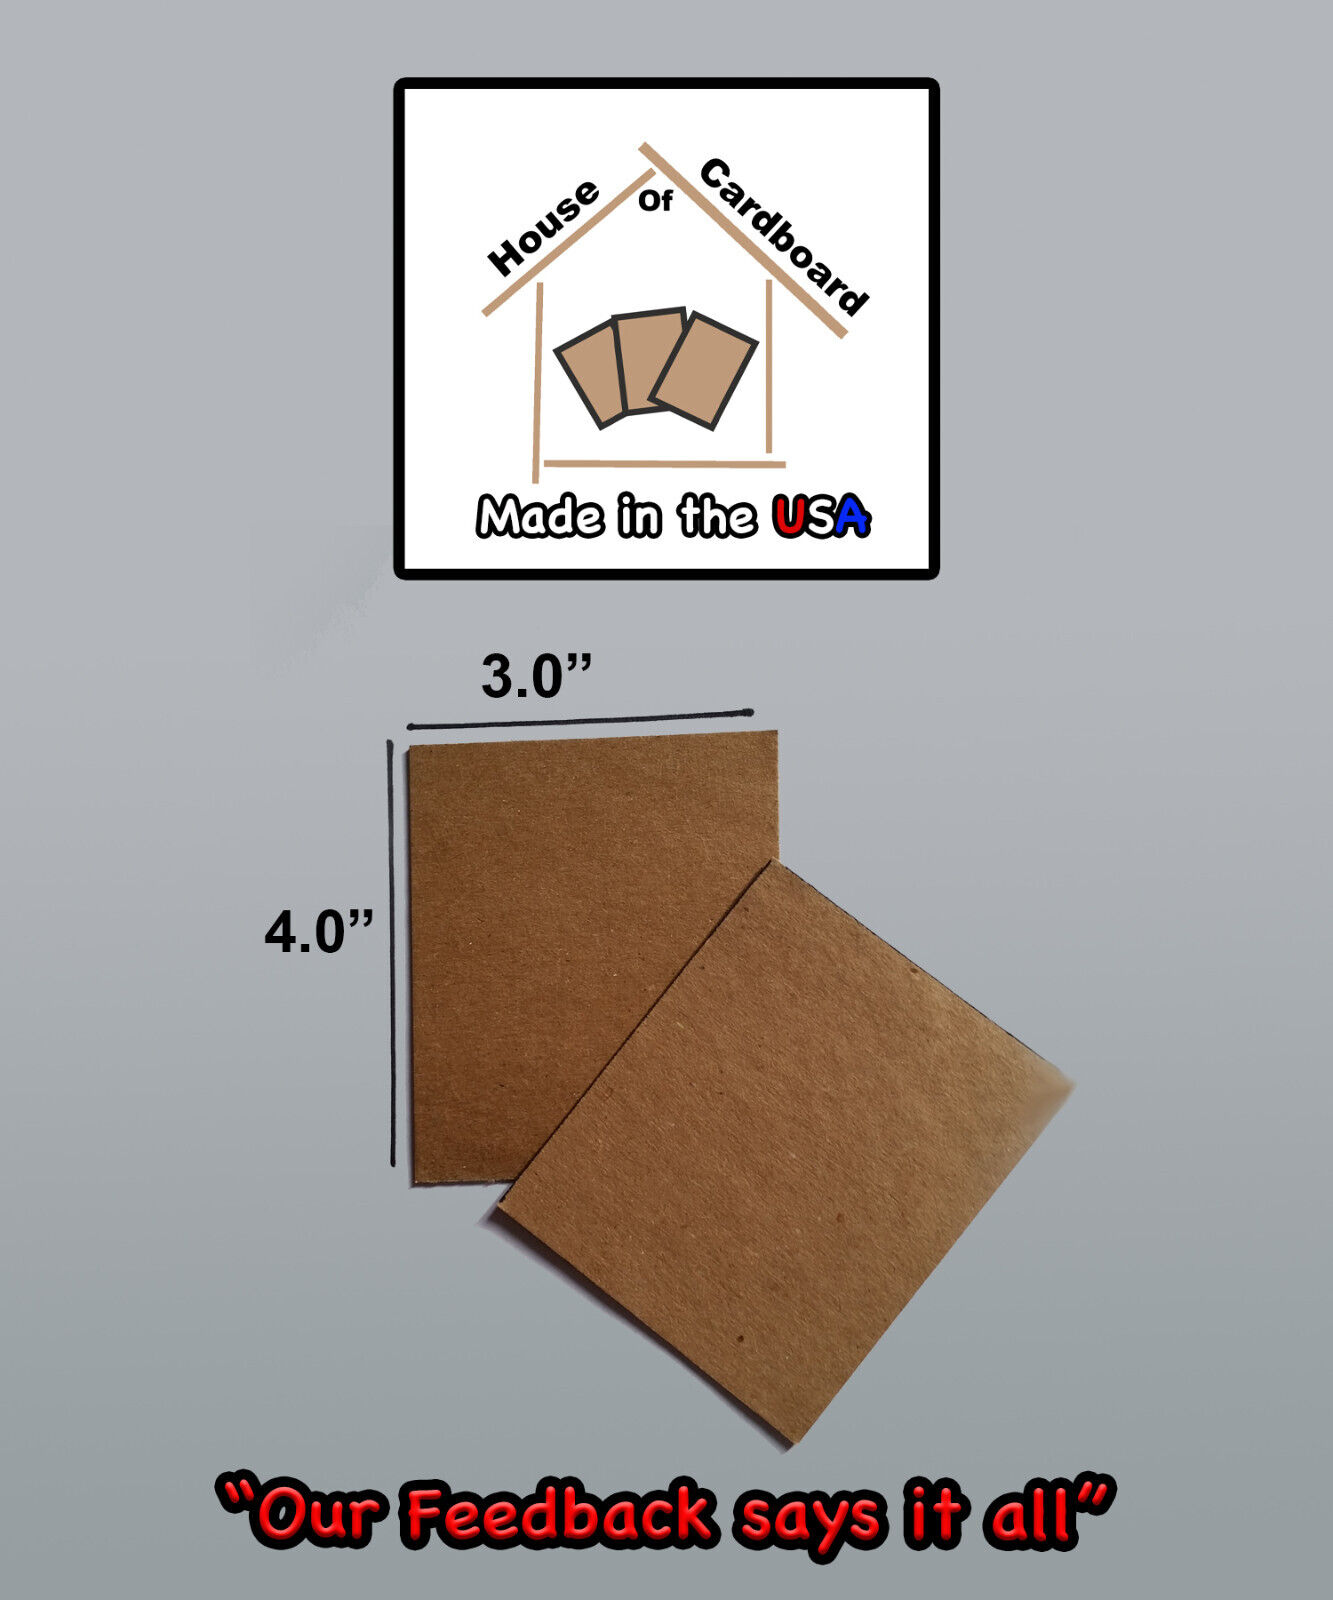 350 3"x4" Cardboard Shipping Protectors for trading Cards. Made USA Recycled cardboard